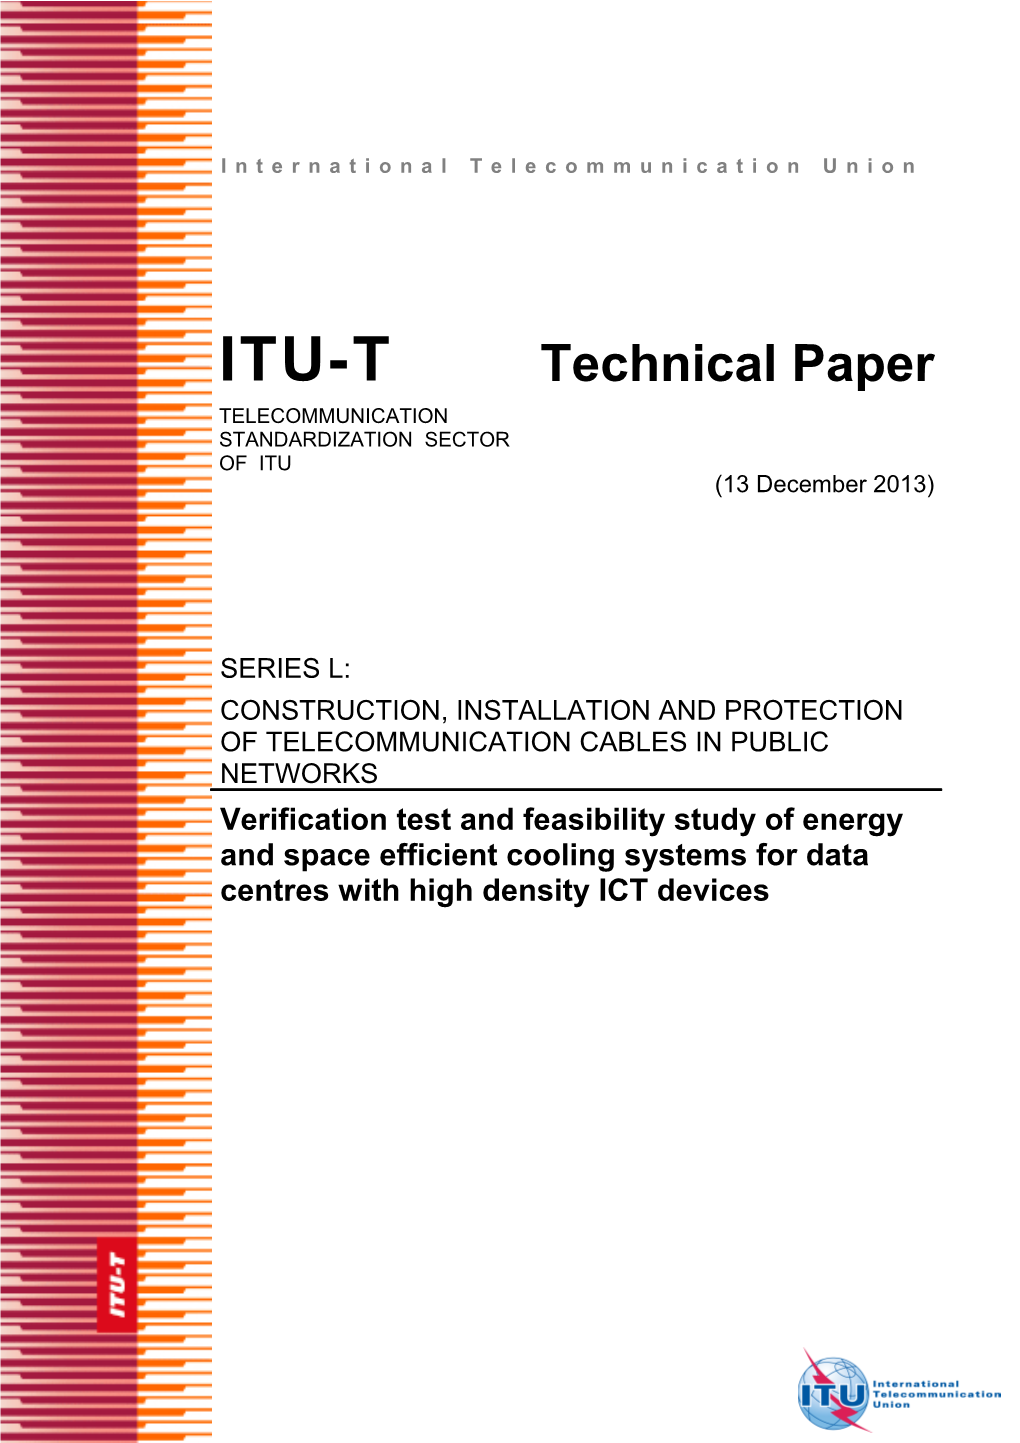 Technical Paper Verification Test and Feasibility Study of Energy and Space Efficient Cooling